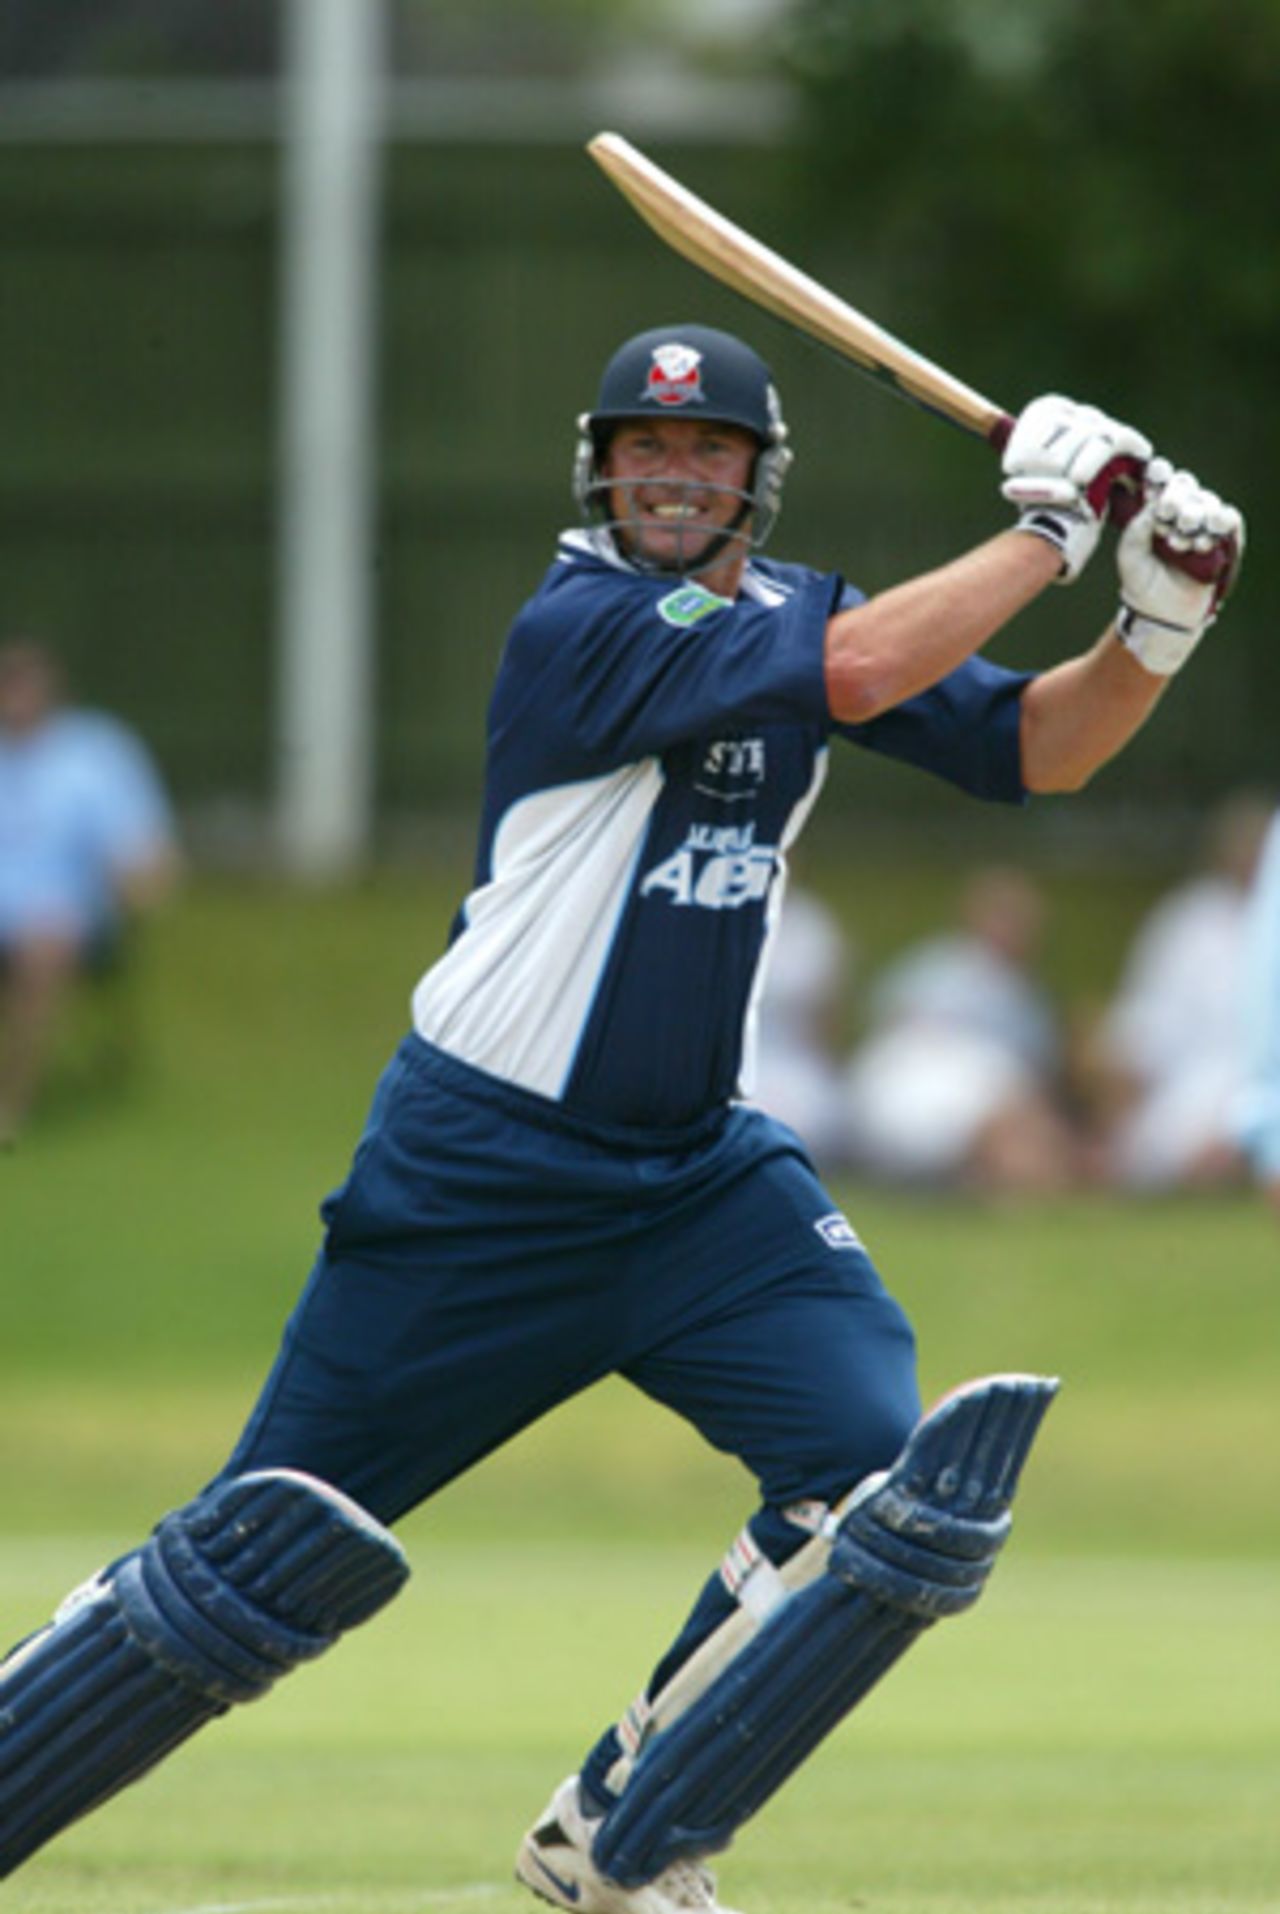 Auckland batsman Aaron Barnes cuts a delivery during his innings of 44. State Shield: Auckland v Central Districts at Eden Park Outer Oval, Auckland, 5 January 2003.